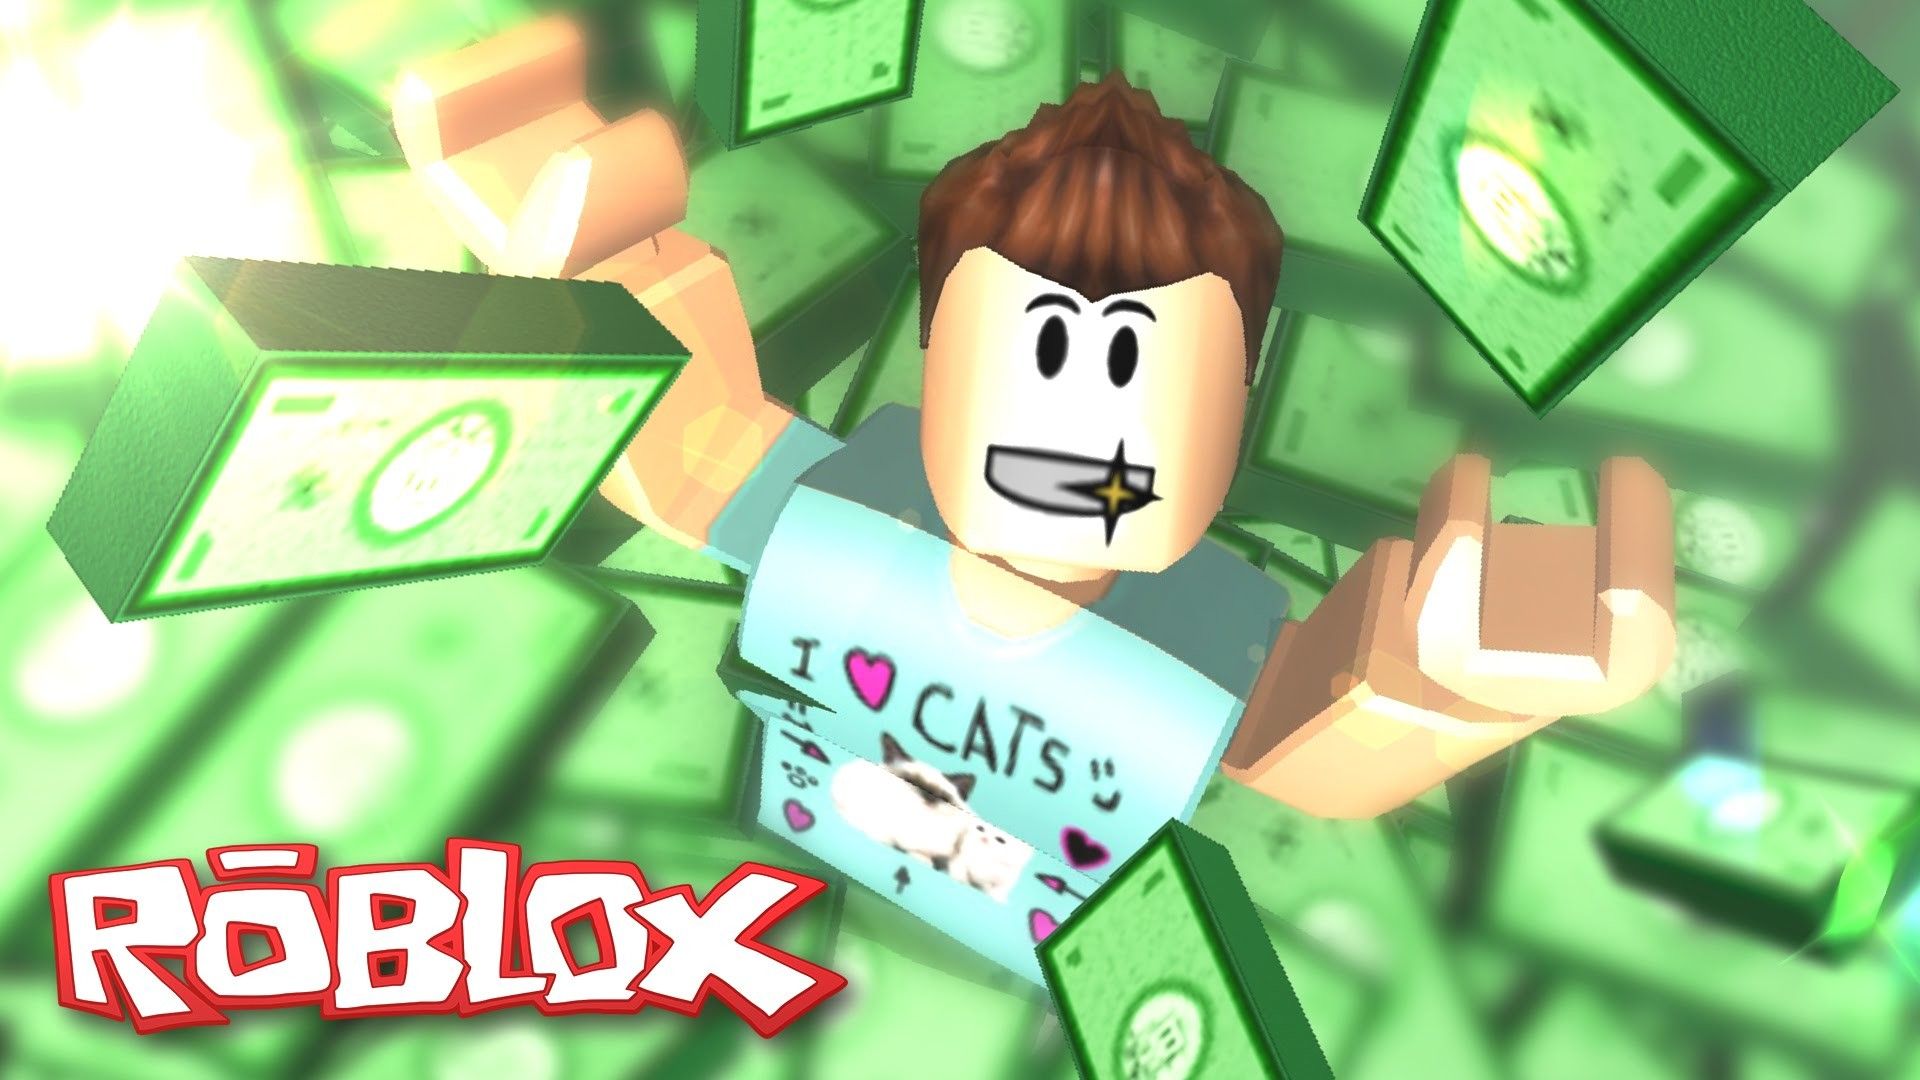 🅴🆇🅲🅰 on X: ROBLOX Wallpaper for your Desktop! High res: http